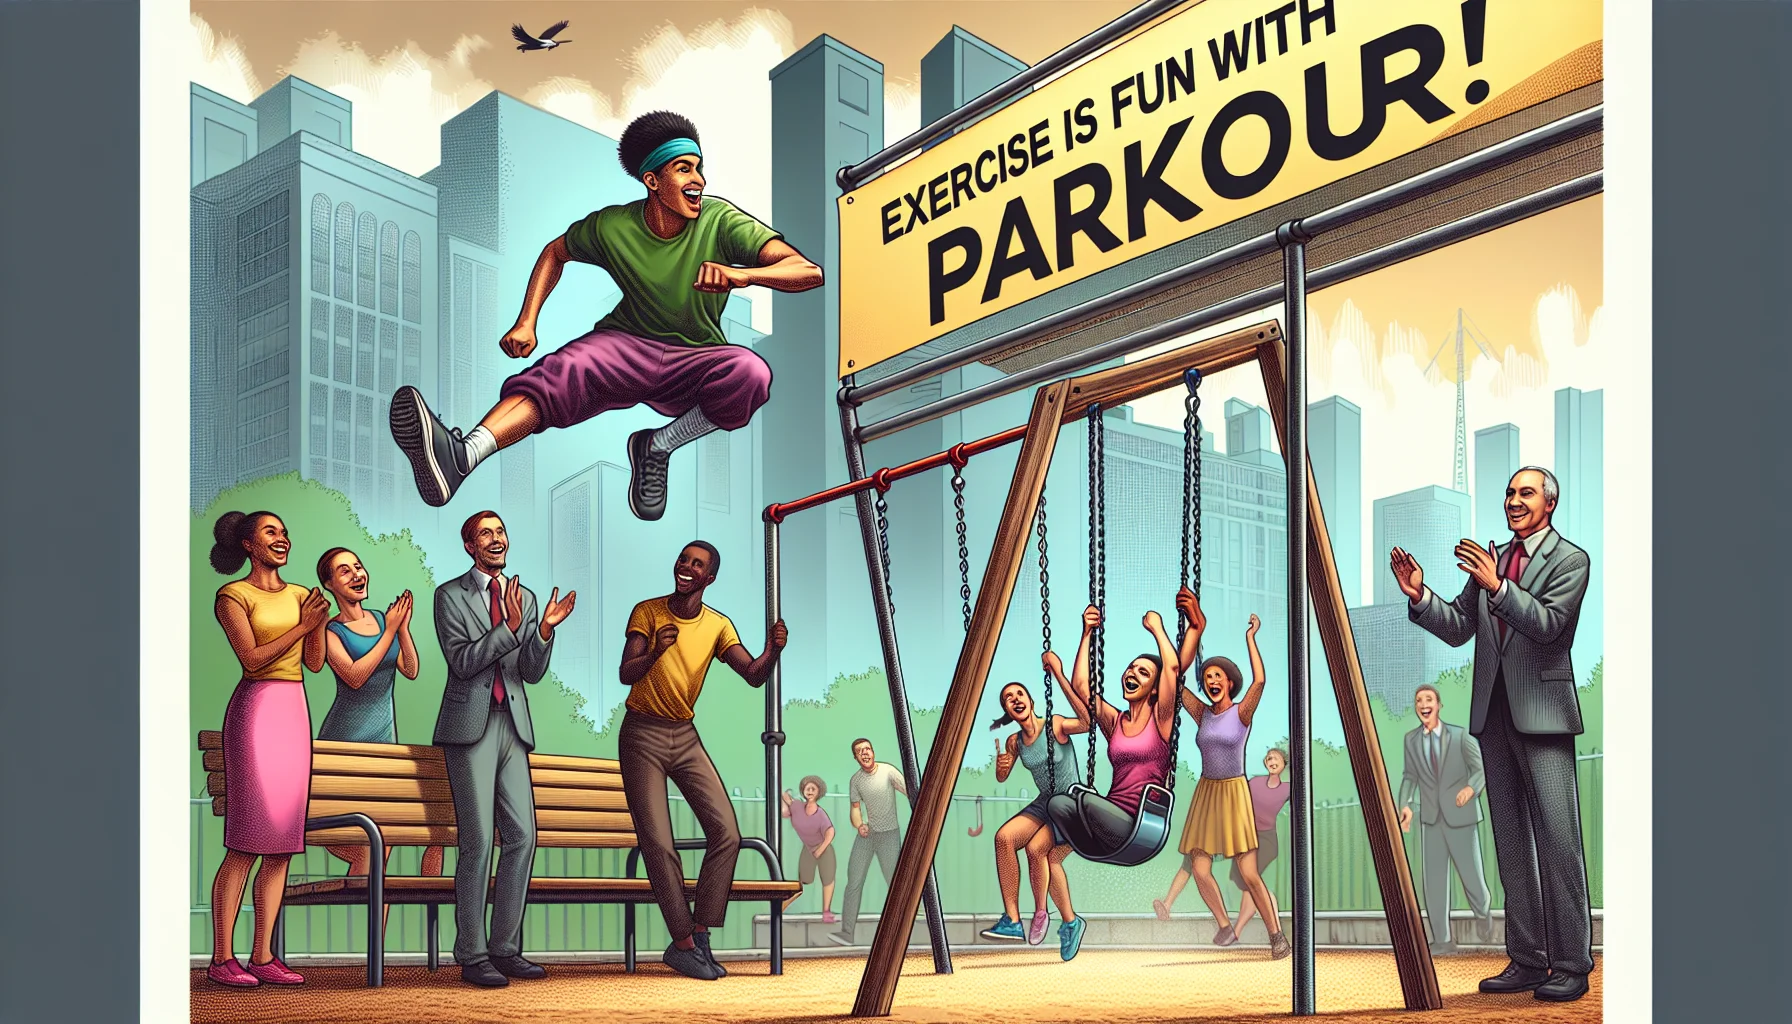 Create a humorous and realistic image of a lively parkour scene at an urban playground. You see a Hispanic female individual leapfrogging over a park bench while onlookers laugh and cheer her on. Not too far, a Black male participant uses the swing set as his obstacle course, swinging from one bar to the next in an adventurous fashion. There's an encouraging banner overhead with the words 'Exercise is fun with Parkour!.' The entire atmosphere of the image is filled with excitement, engagement, and humor, encouraging the viewer to join in the practical exercise regimen of parkour.